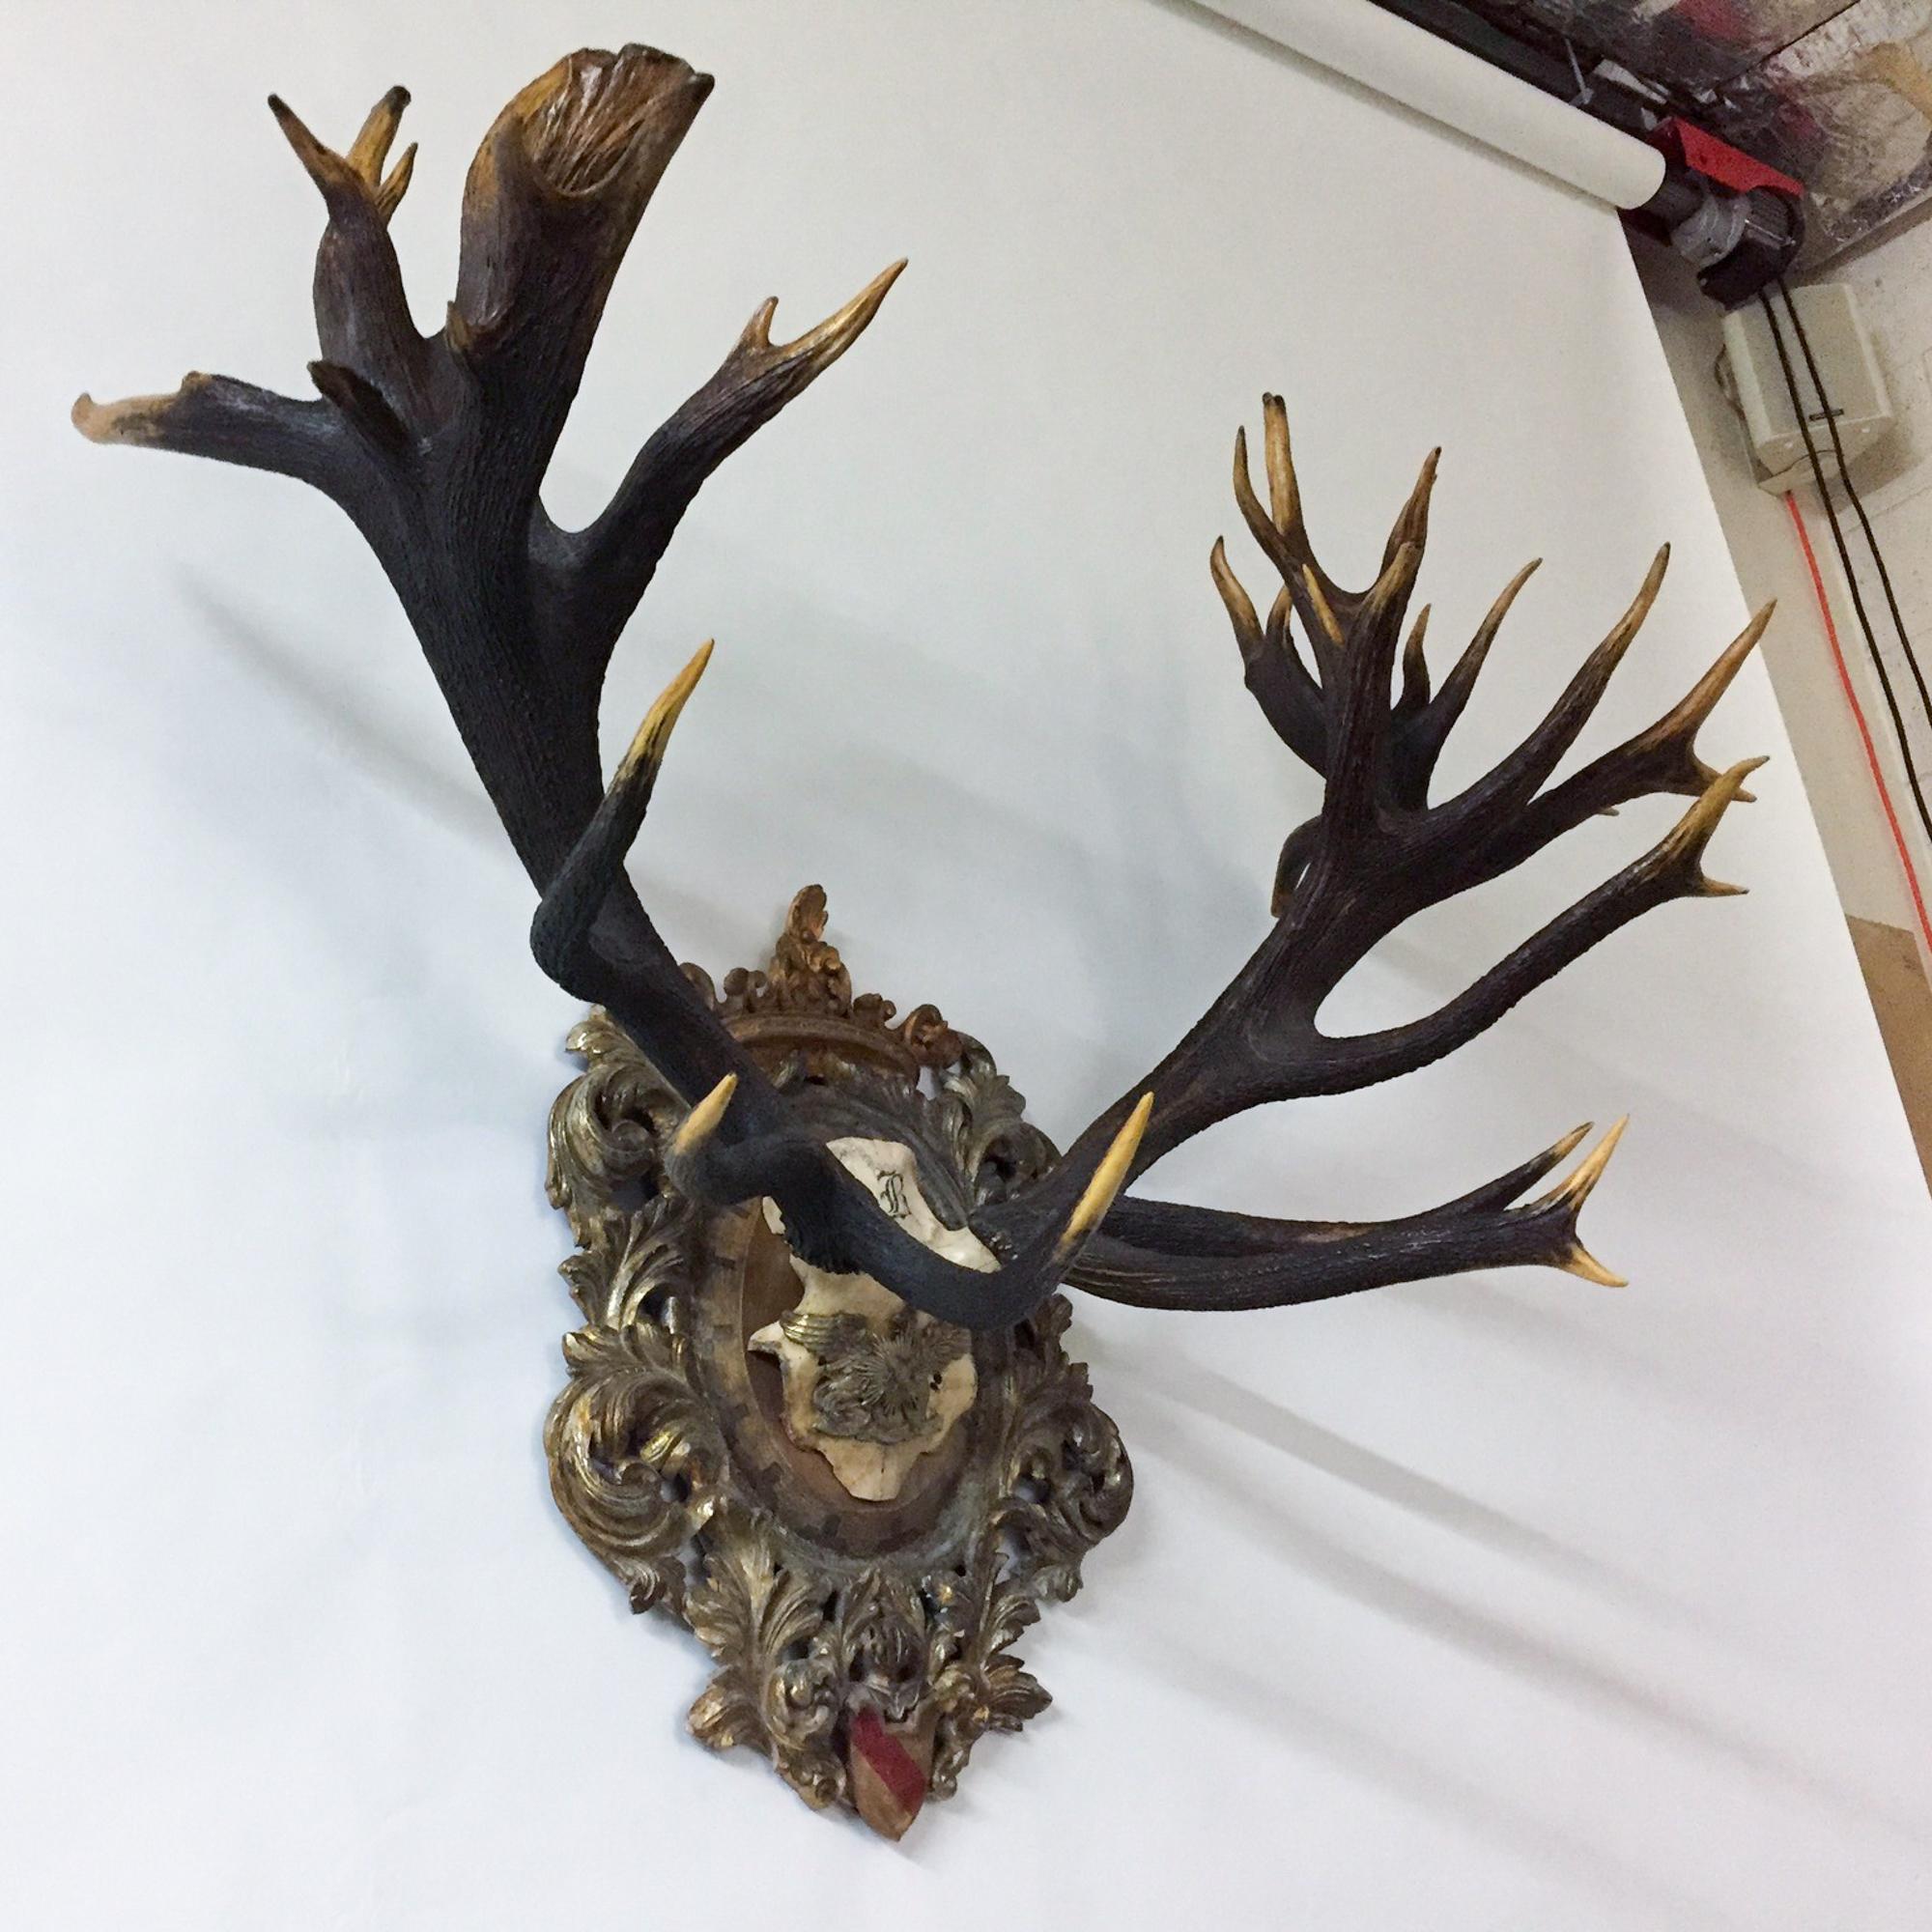 This antique German Red Stag trophy is exquisitely mounted on an ornately hand carved gilt wood plaque. The skull cap features a wappen from the Royal House of Baden, and at the bottom of the plaque is the shield of Baden below a carved knight.